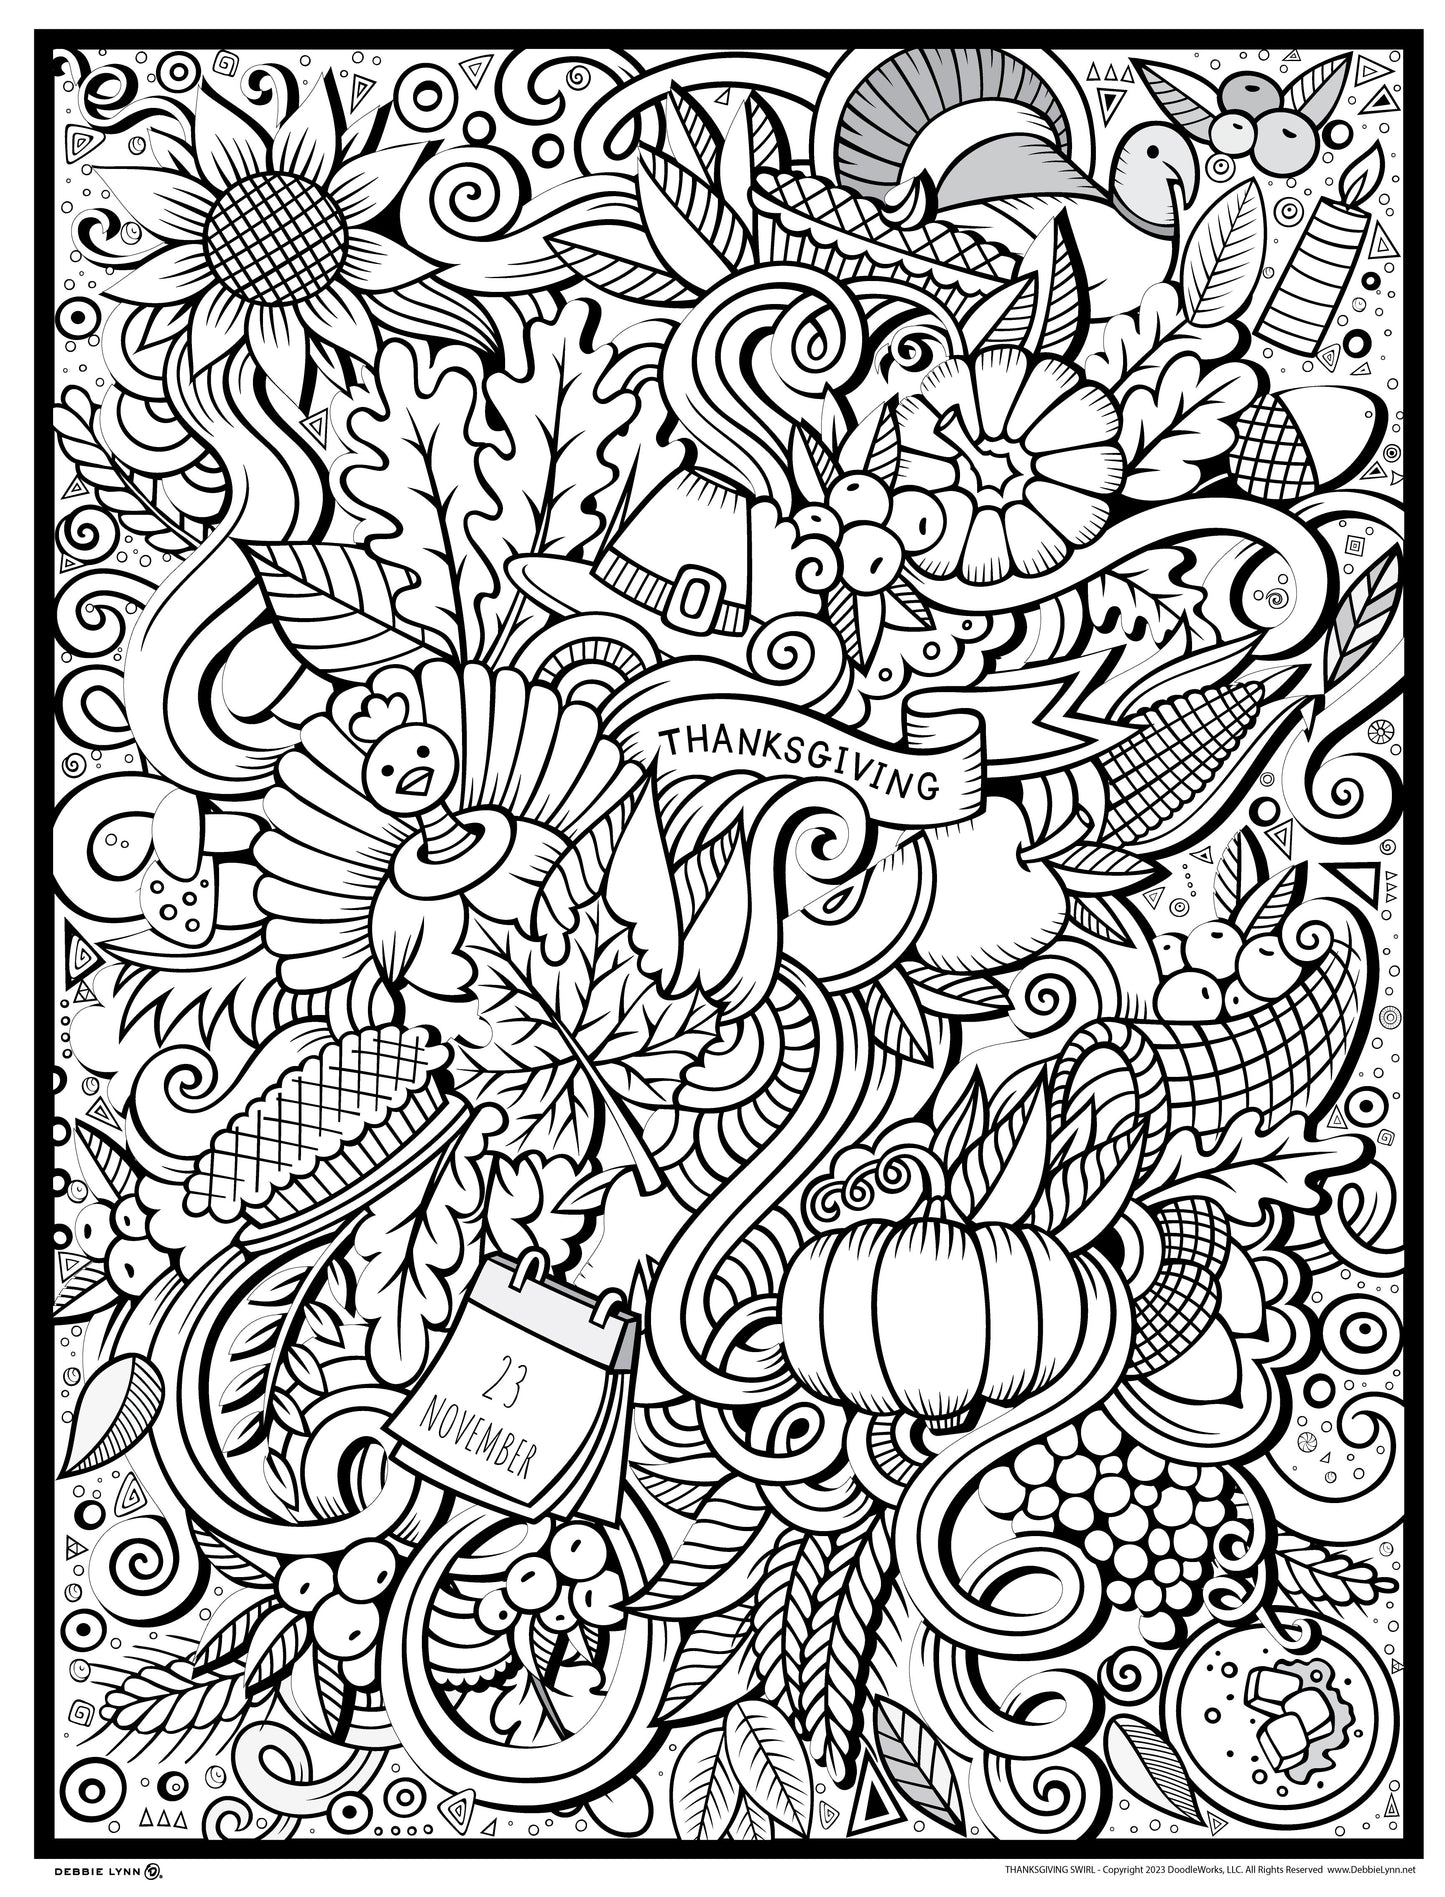 Thanksgiving Swirl Personalized Giant Coloring Poster 46"x60"